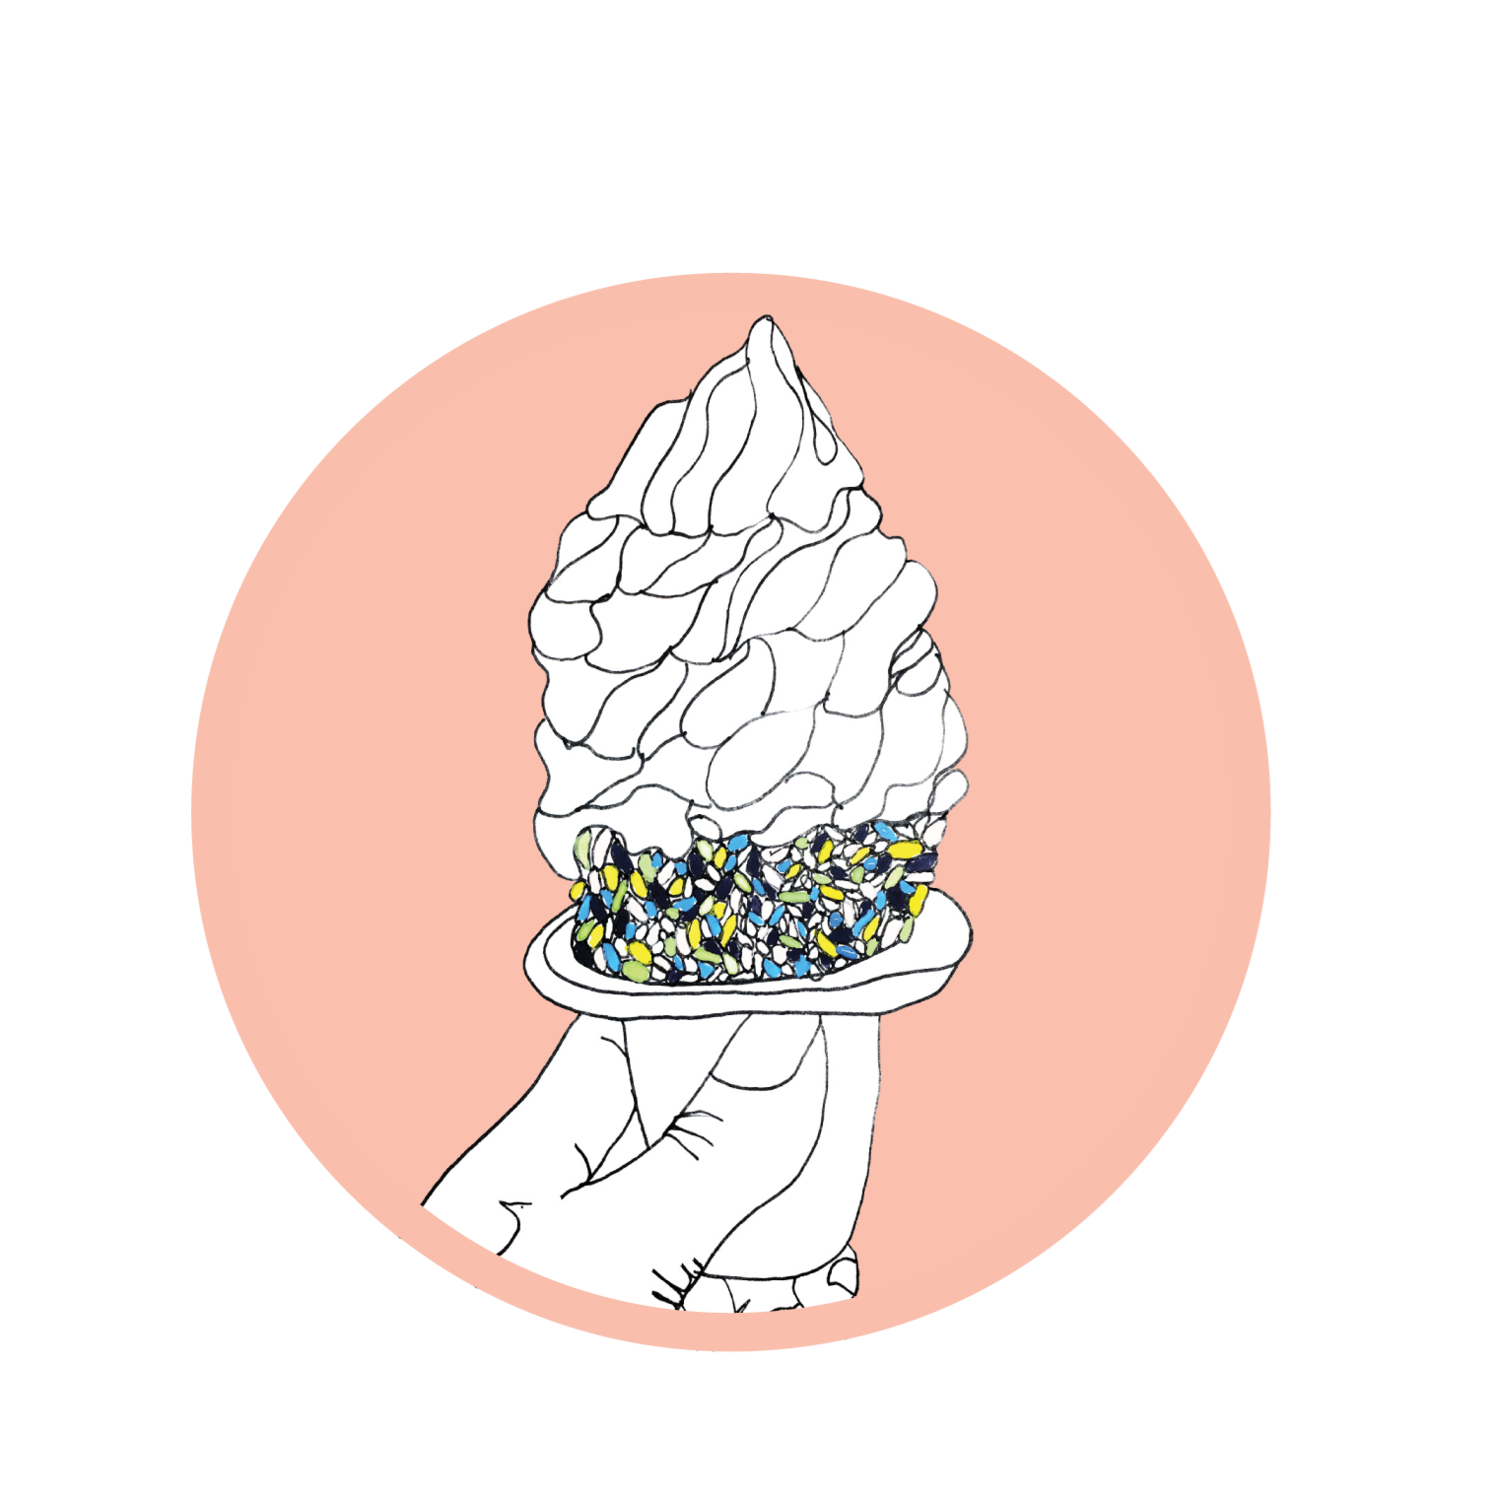 Places I've Consumed